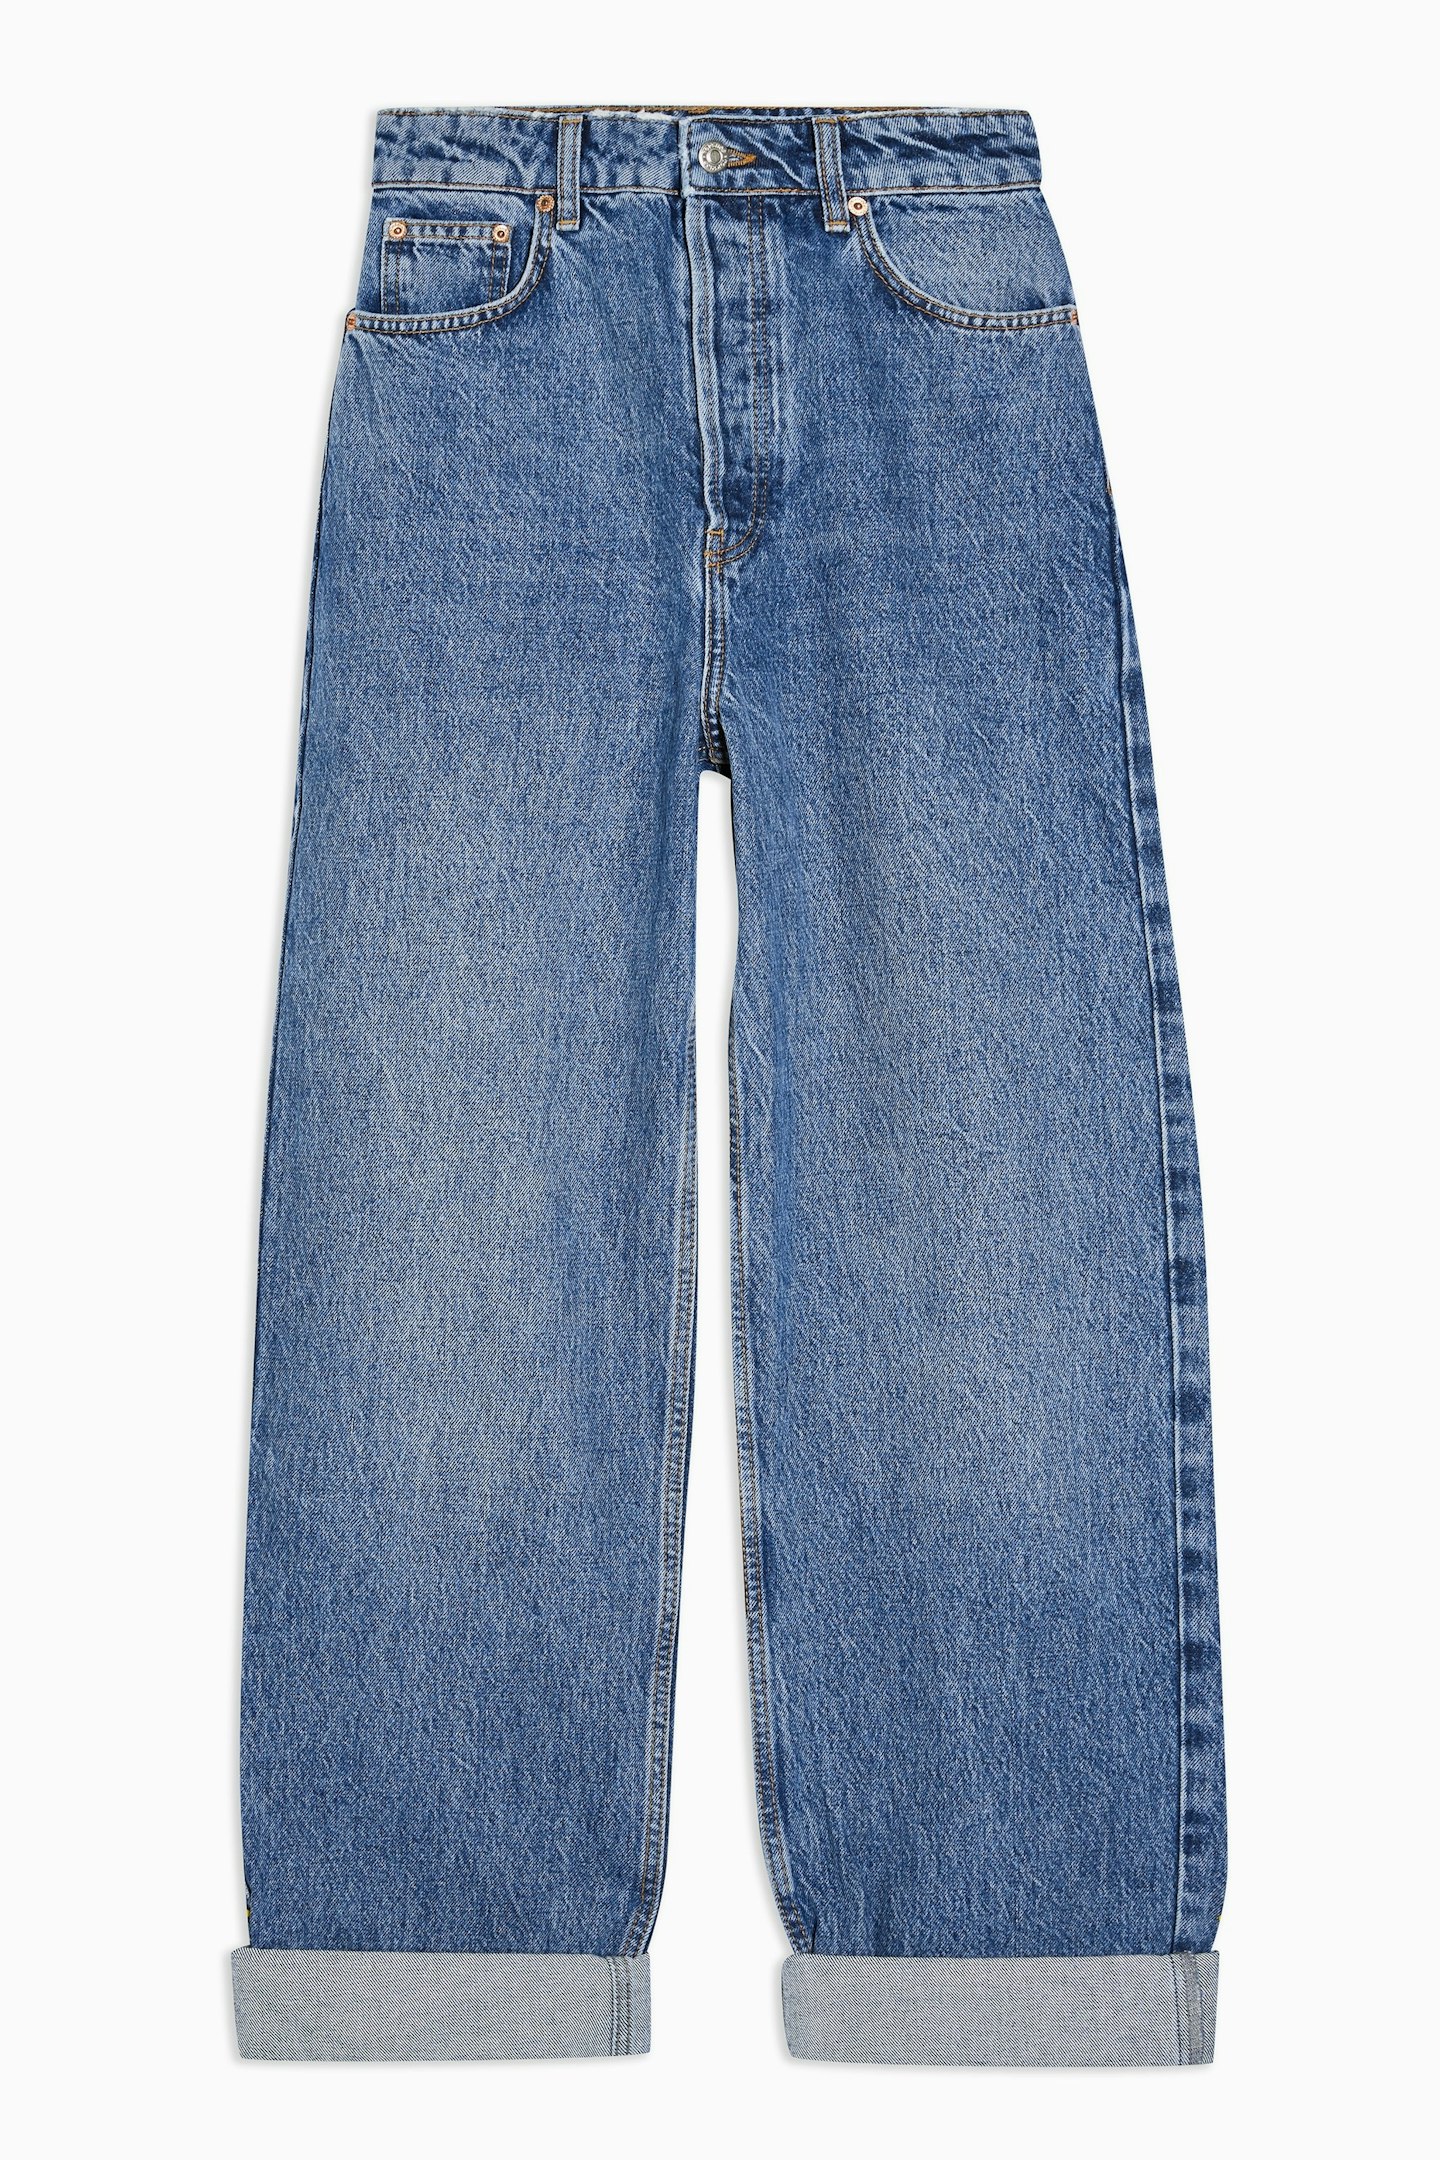 Topshop, Considered Mom Jeans, Was £29.99, Now £23.99